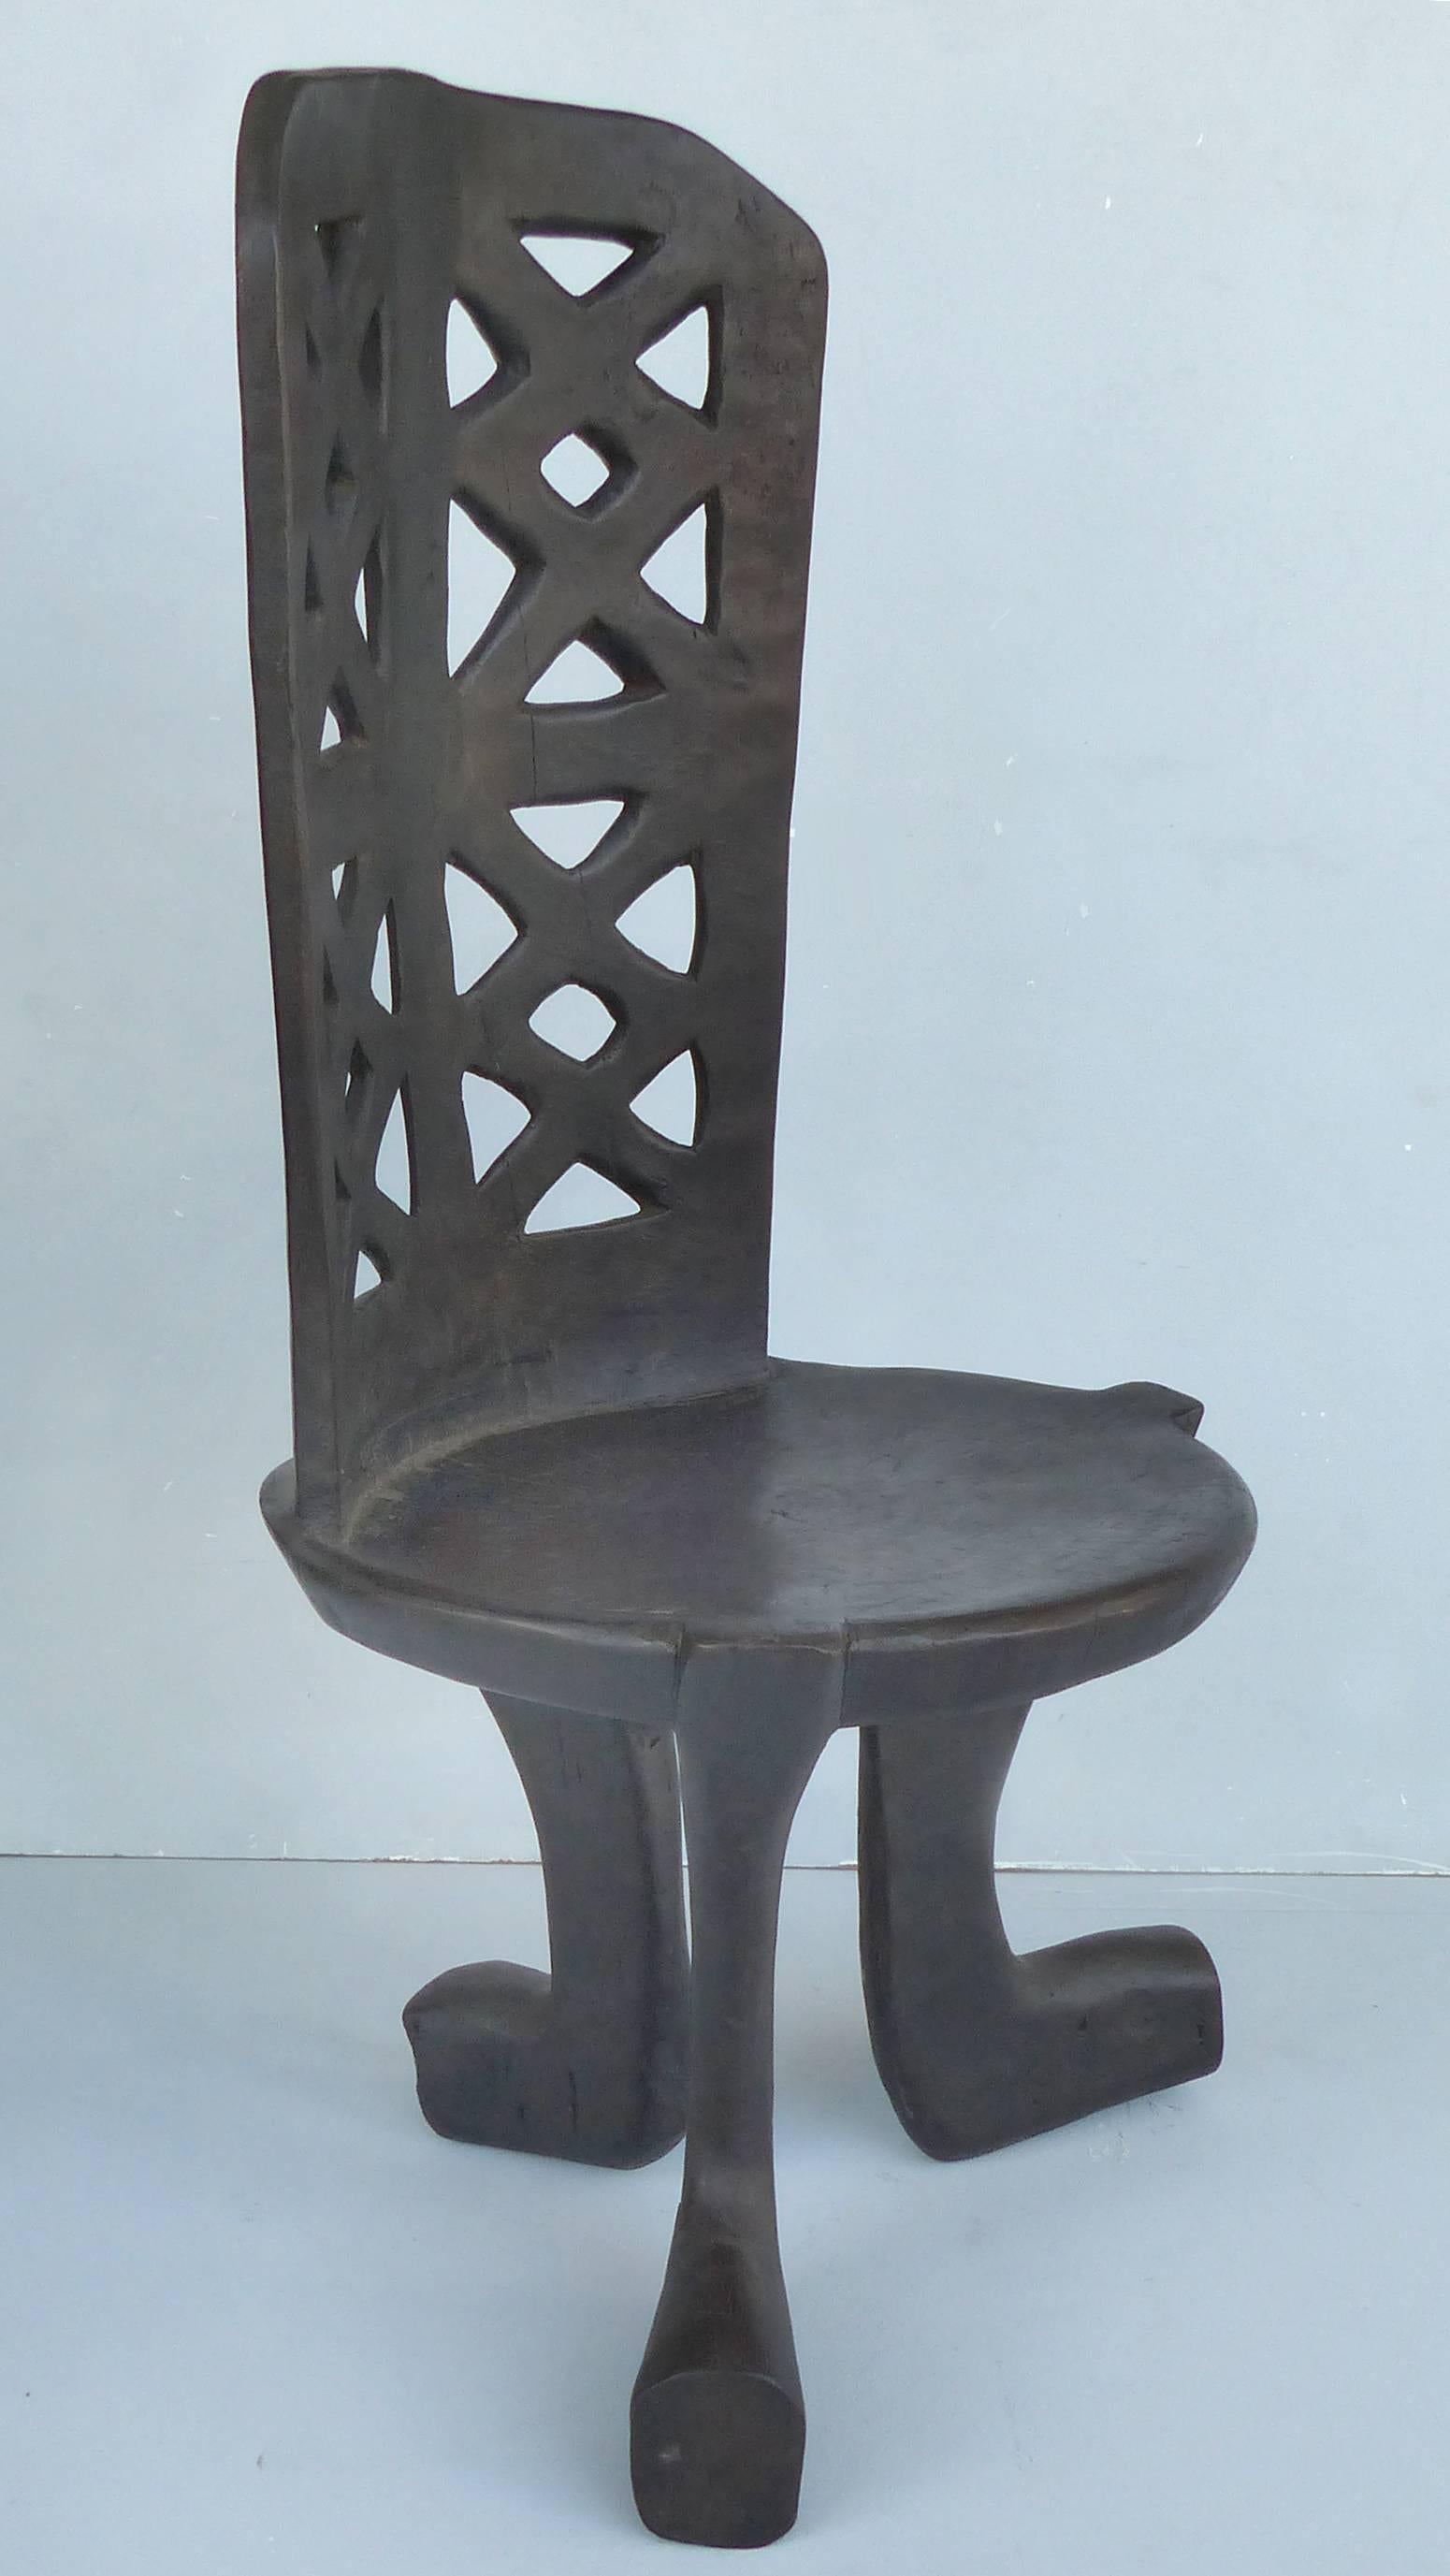 Rare Ethiopian Three-Legged Coptic Chair with Carved Crosses in Back Slat

Rare and unusual African three-legged chair from Ethiopia. This chair is carved from one piece of wood and has a back slat with carved crosses. Measures: Seat 15.75